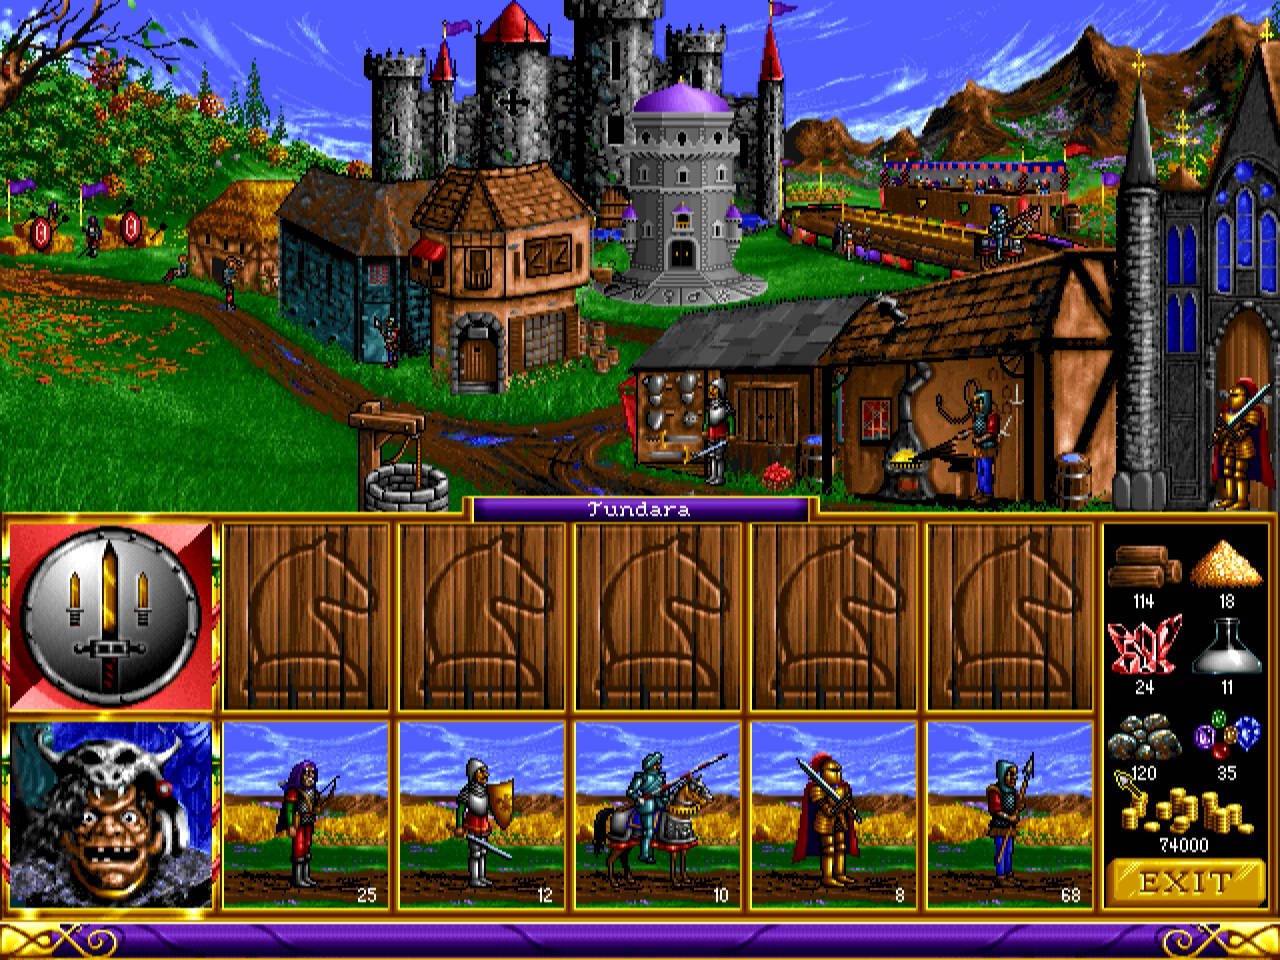 Town screen, inside the Knight town